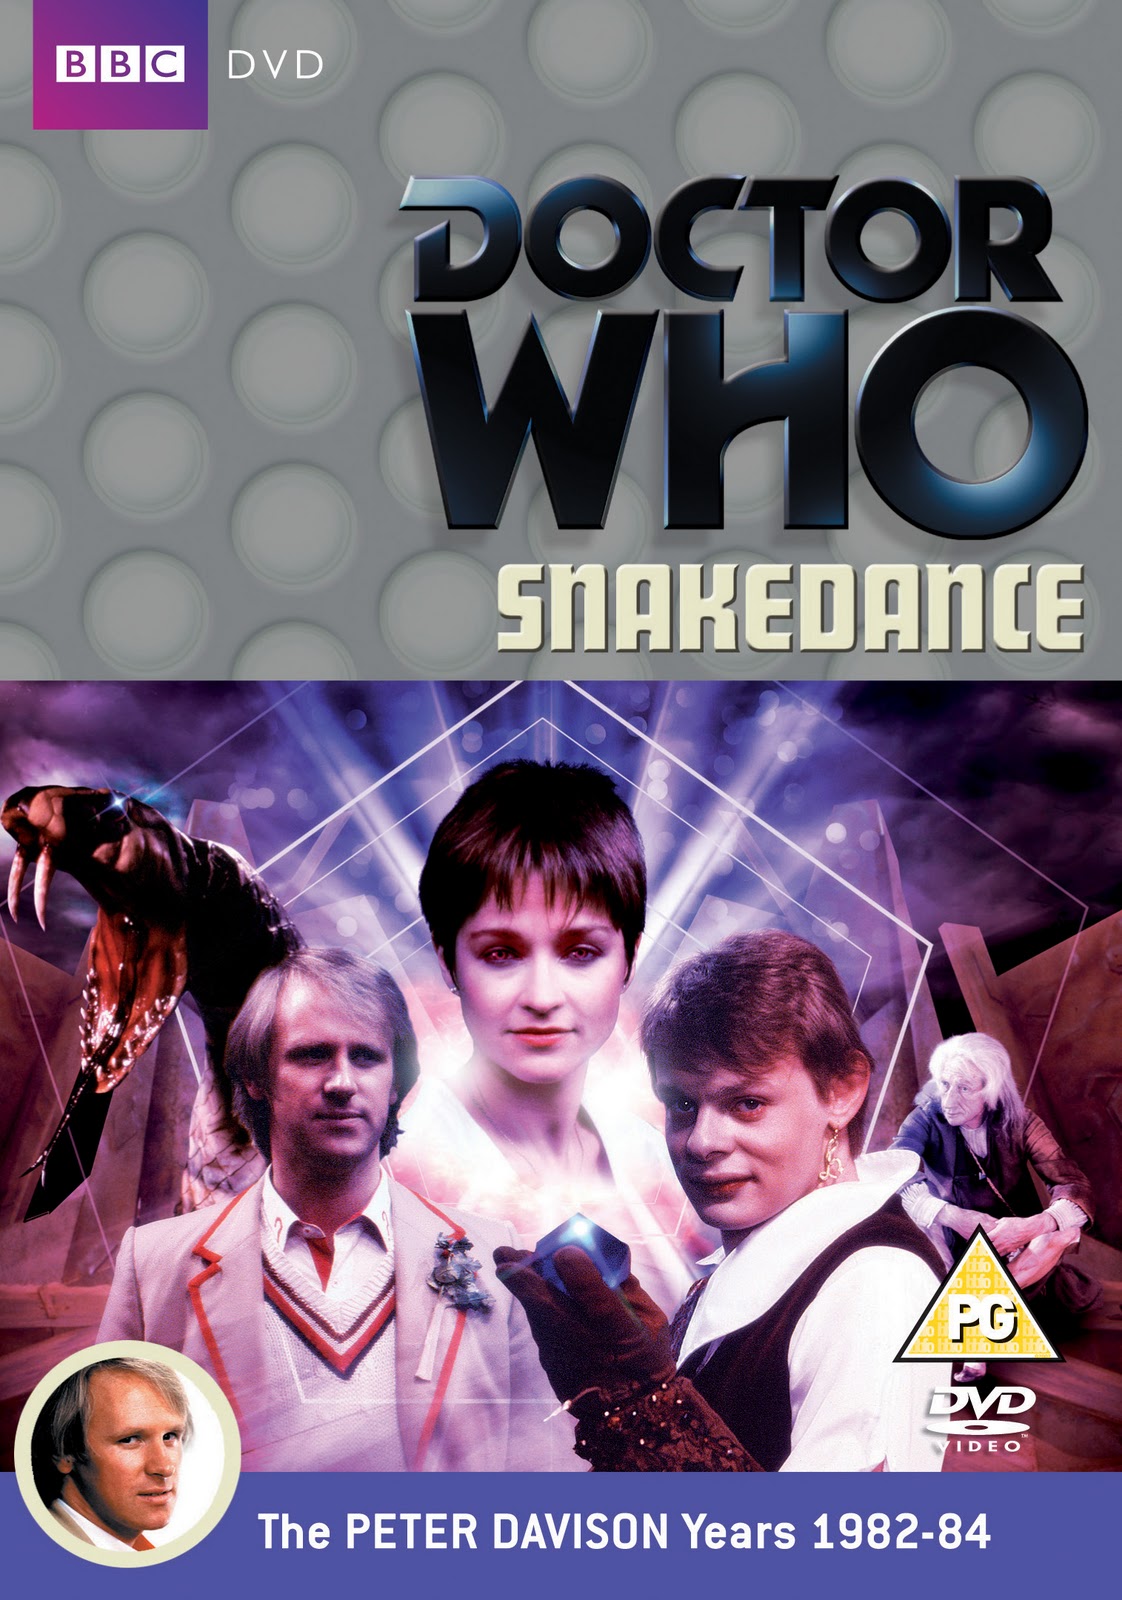 Picture of BBCDVD 2871B Doctor Who - Snakedance by artist Unknown from the BBC records and Tapes library